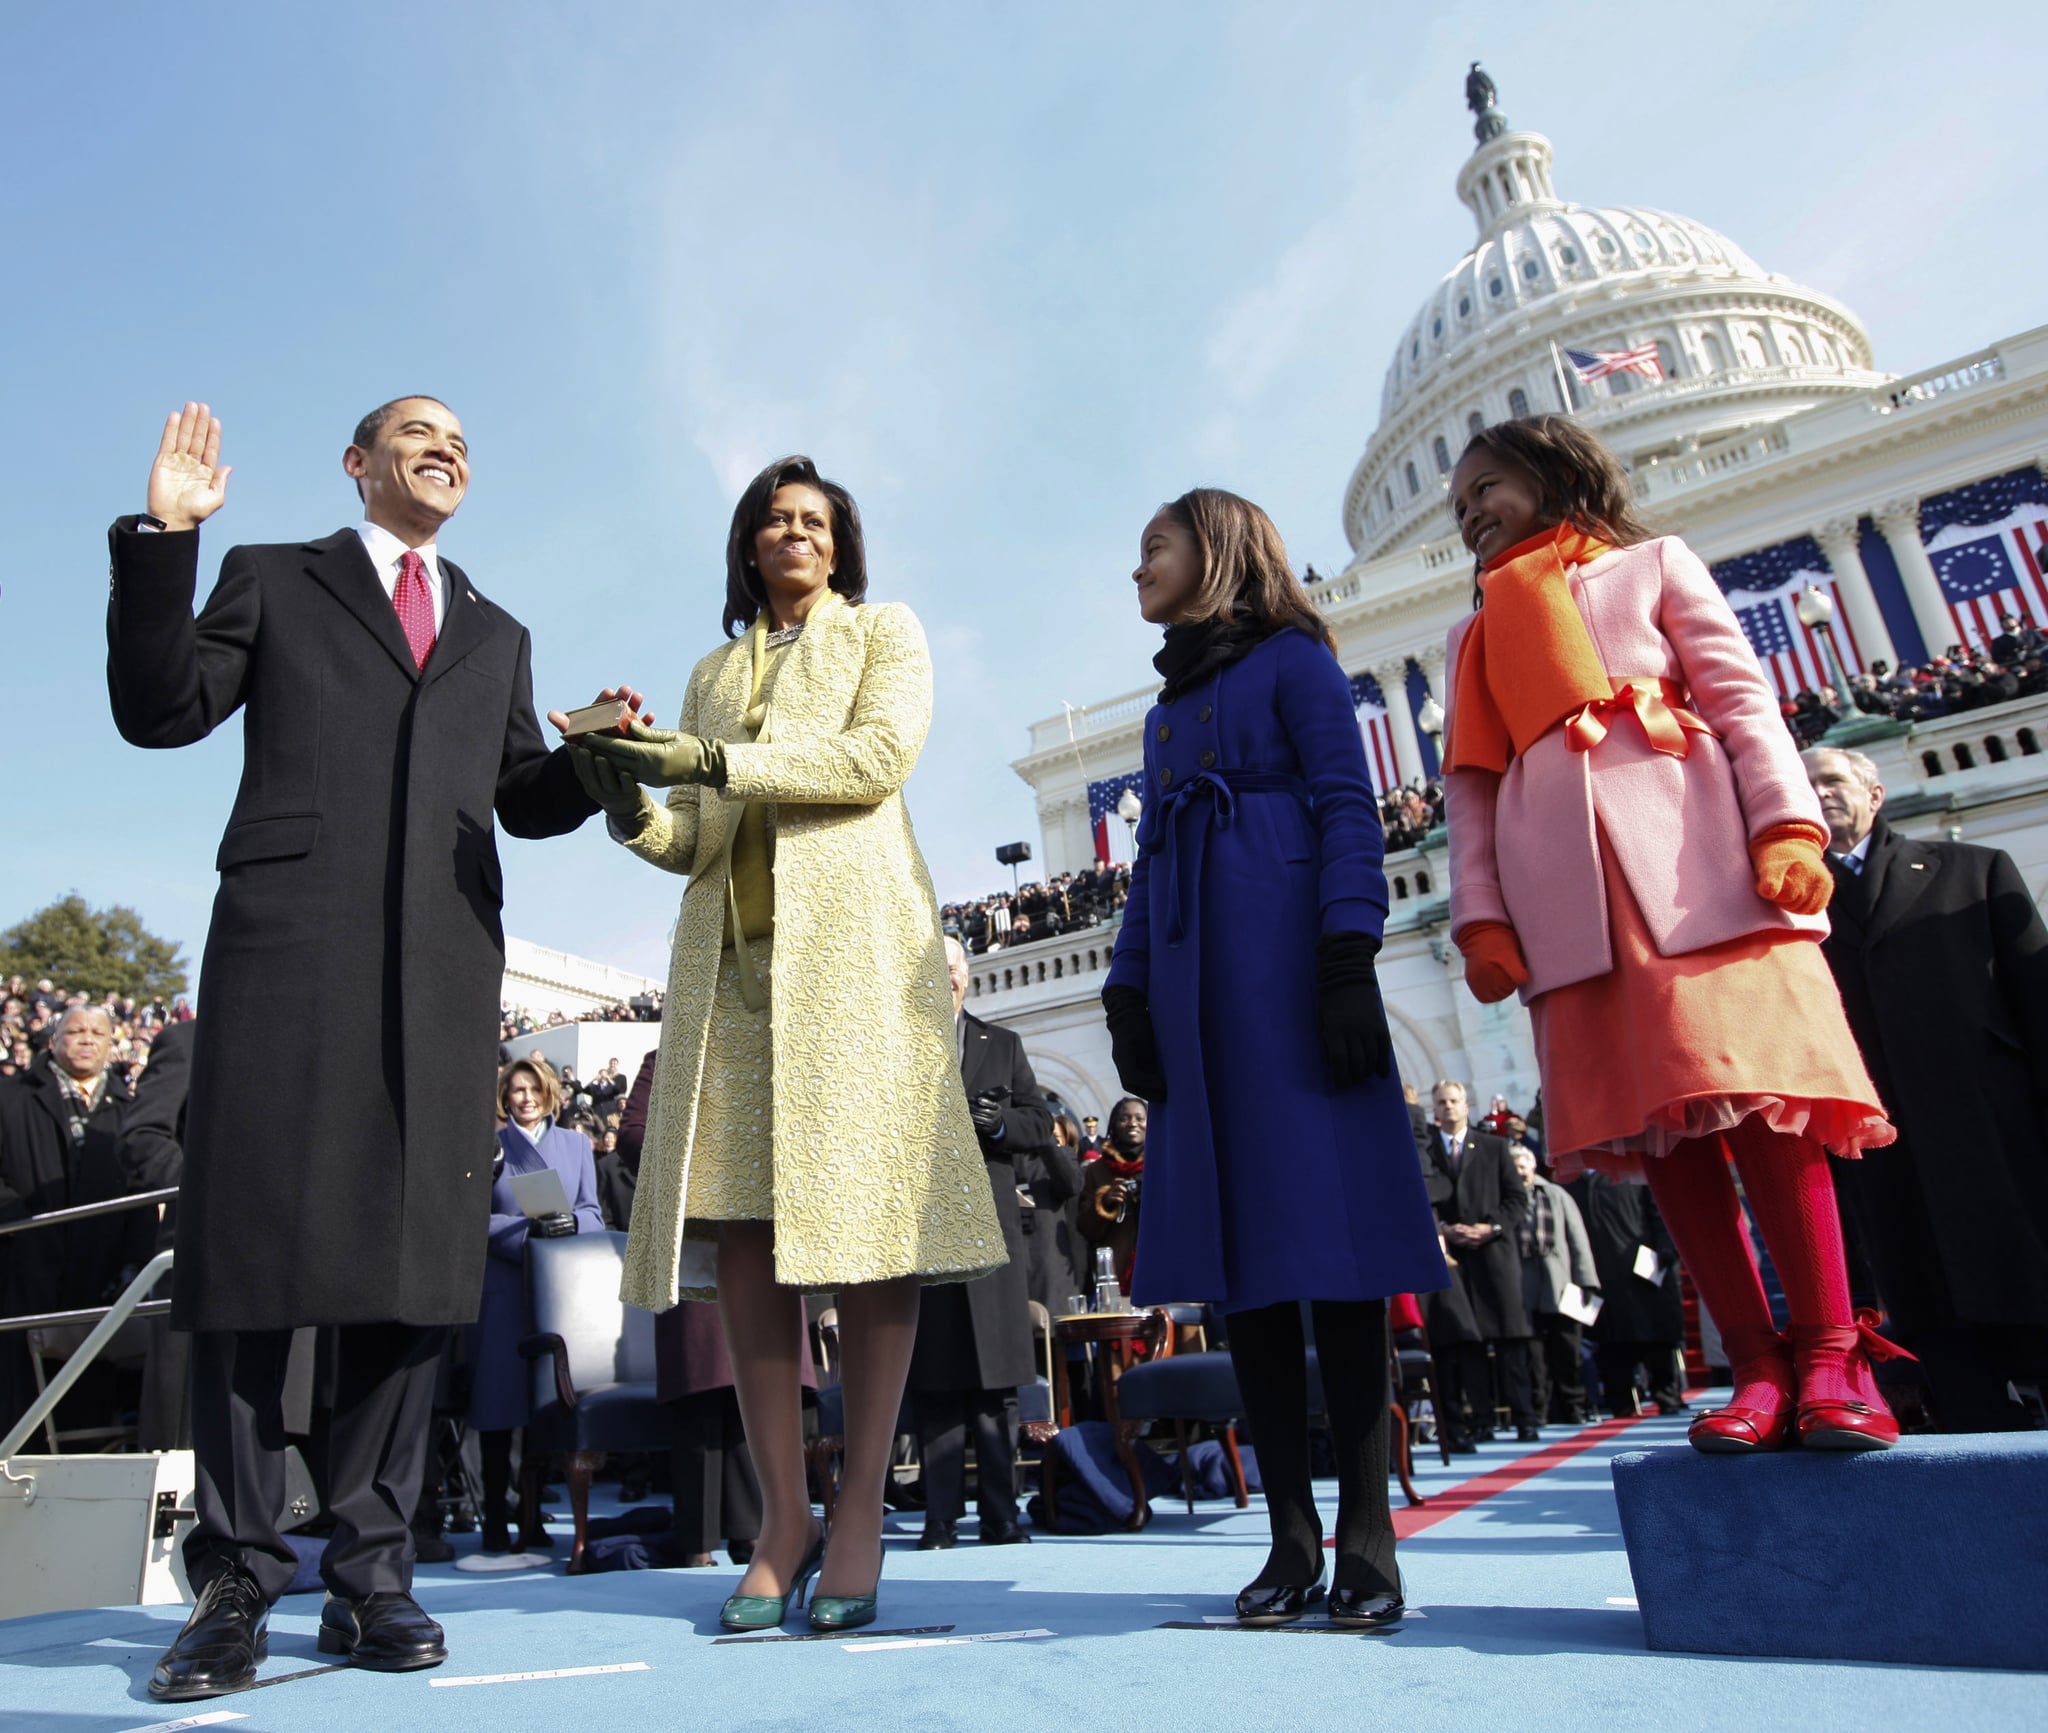 Barack Obama (L) takes the oath of office as the 44th US President with his wife, Michelle, by his side at the US Capitol in Washington, DC, January 20, 2009. The Obama's were joined by their daughters Malia (2ndR) and Sasha. Chuck Kennedy/Pool (Photo credit should read CHUCK KENNEDY/AFP via Getty Images)